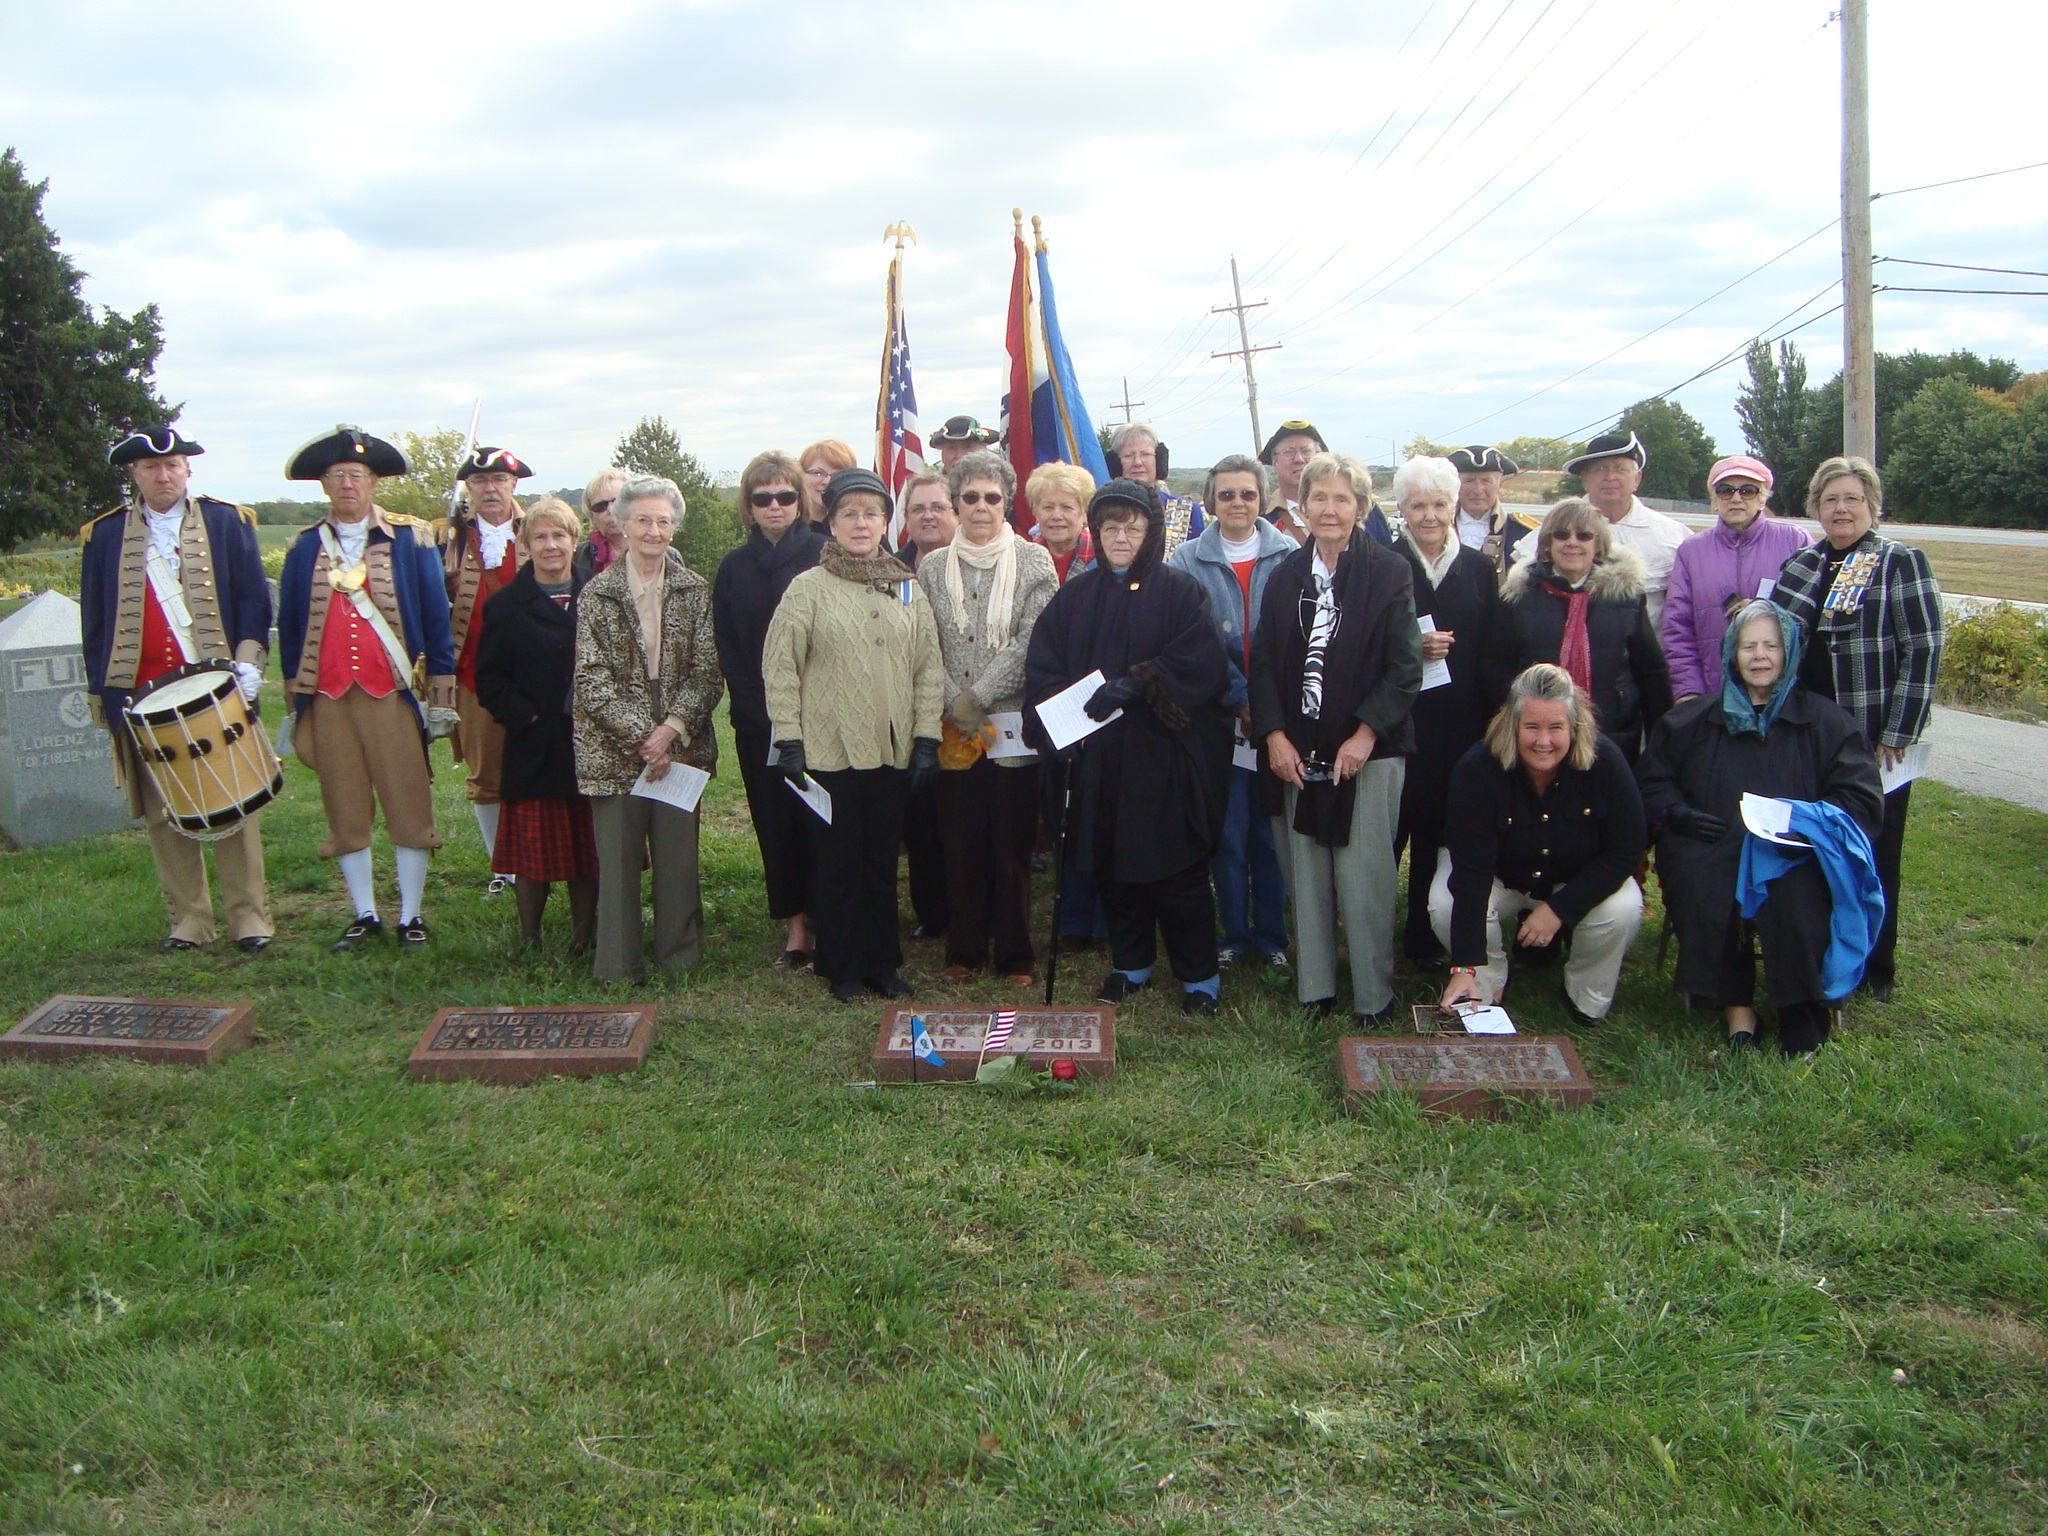 Pictured here is the MOSSAR Color Guard team at a Grave Marking for Eleanor Jean Creason Shafer, an Independence Pioneers Chapter DAR Chapter member who is buried at Salem Cemetery in Independence, Missouri. The MOSSAR Color Guard team is shown here on Wednesday, October 16, 2013.